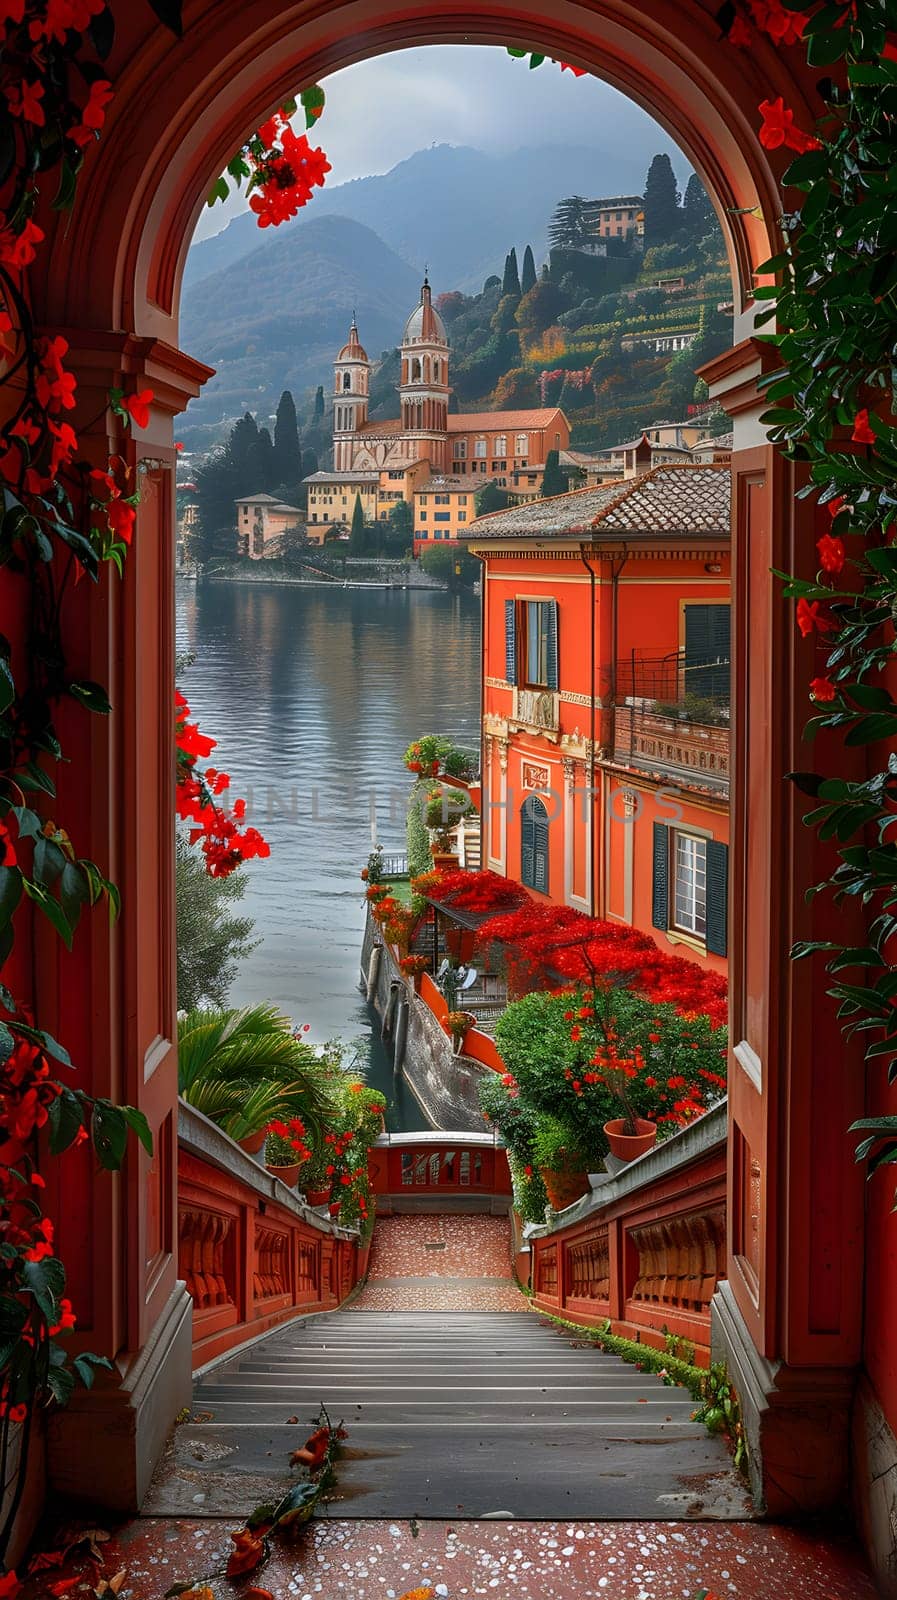 Red flowers frame a lake view through a building archway by Nadtochiy